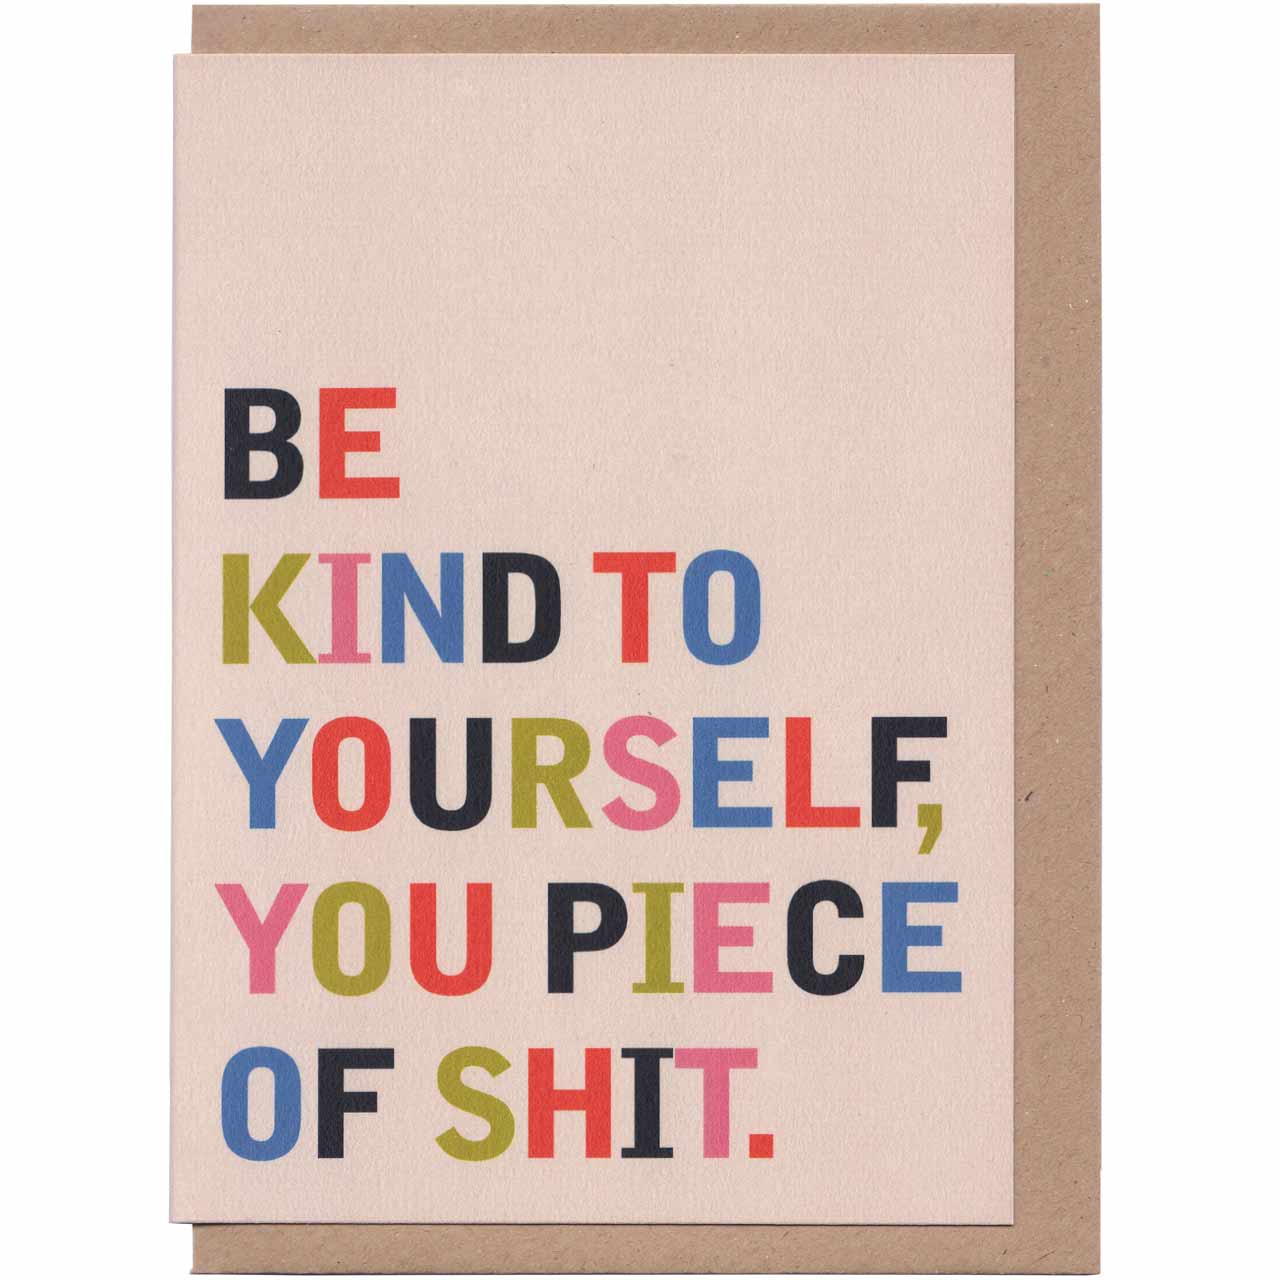 Be Kind You Piece of Shit Card